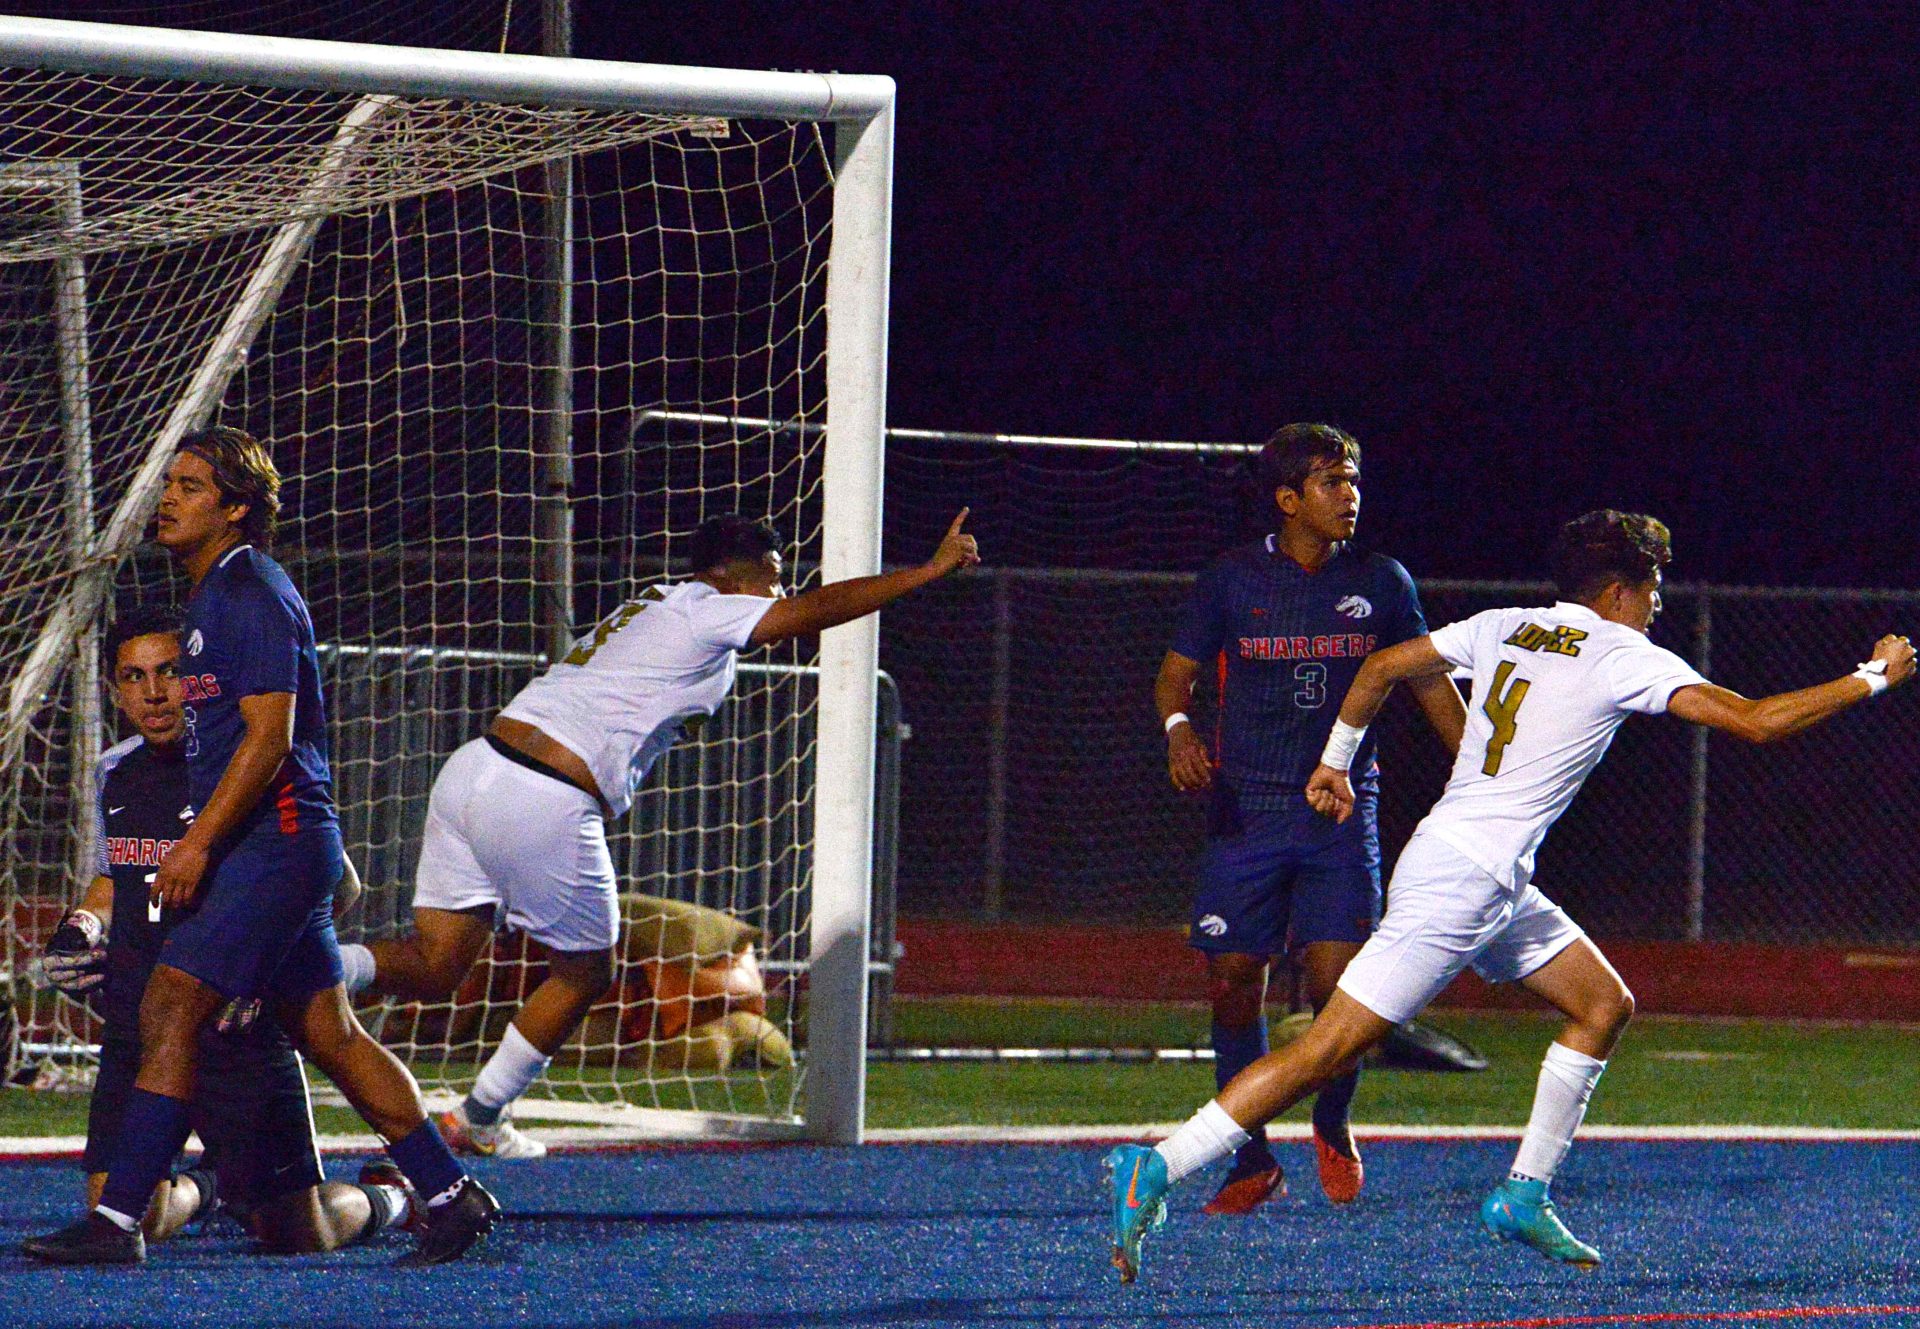 Late goal lifts Lobos past Chargers, punch ticket to regional tourney